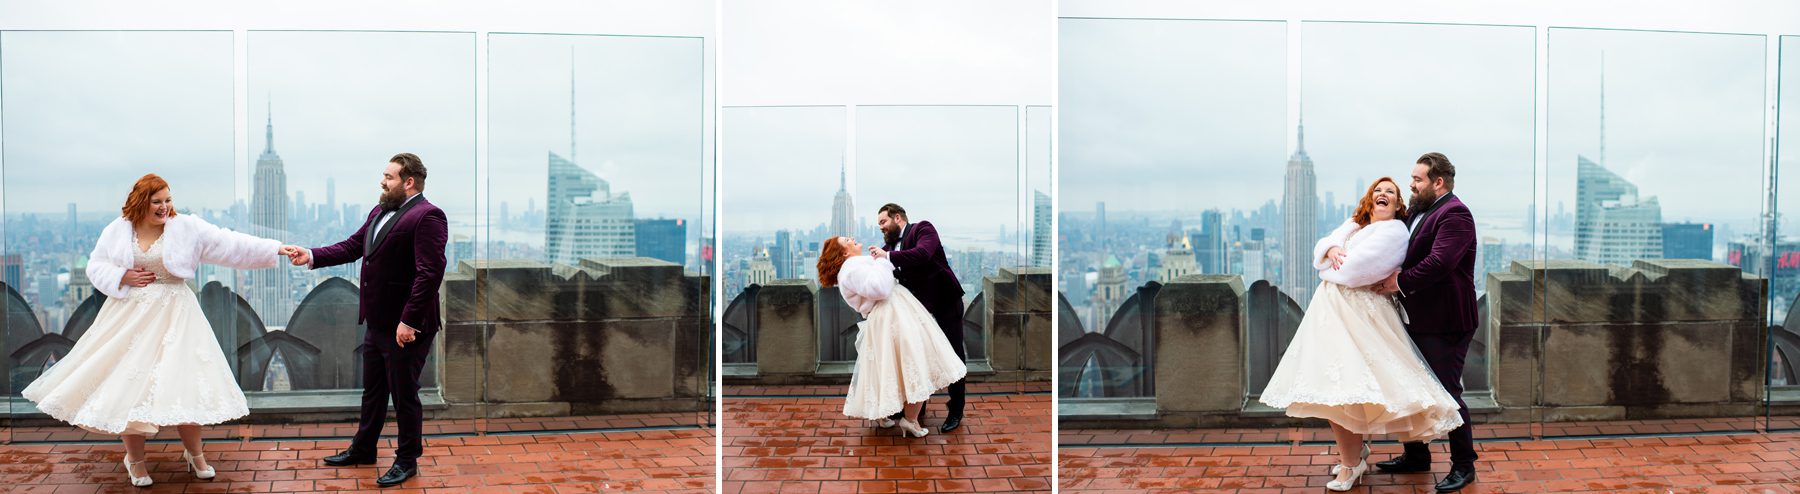 Top of the Rock Bride and Groom